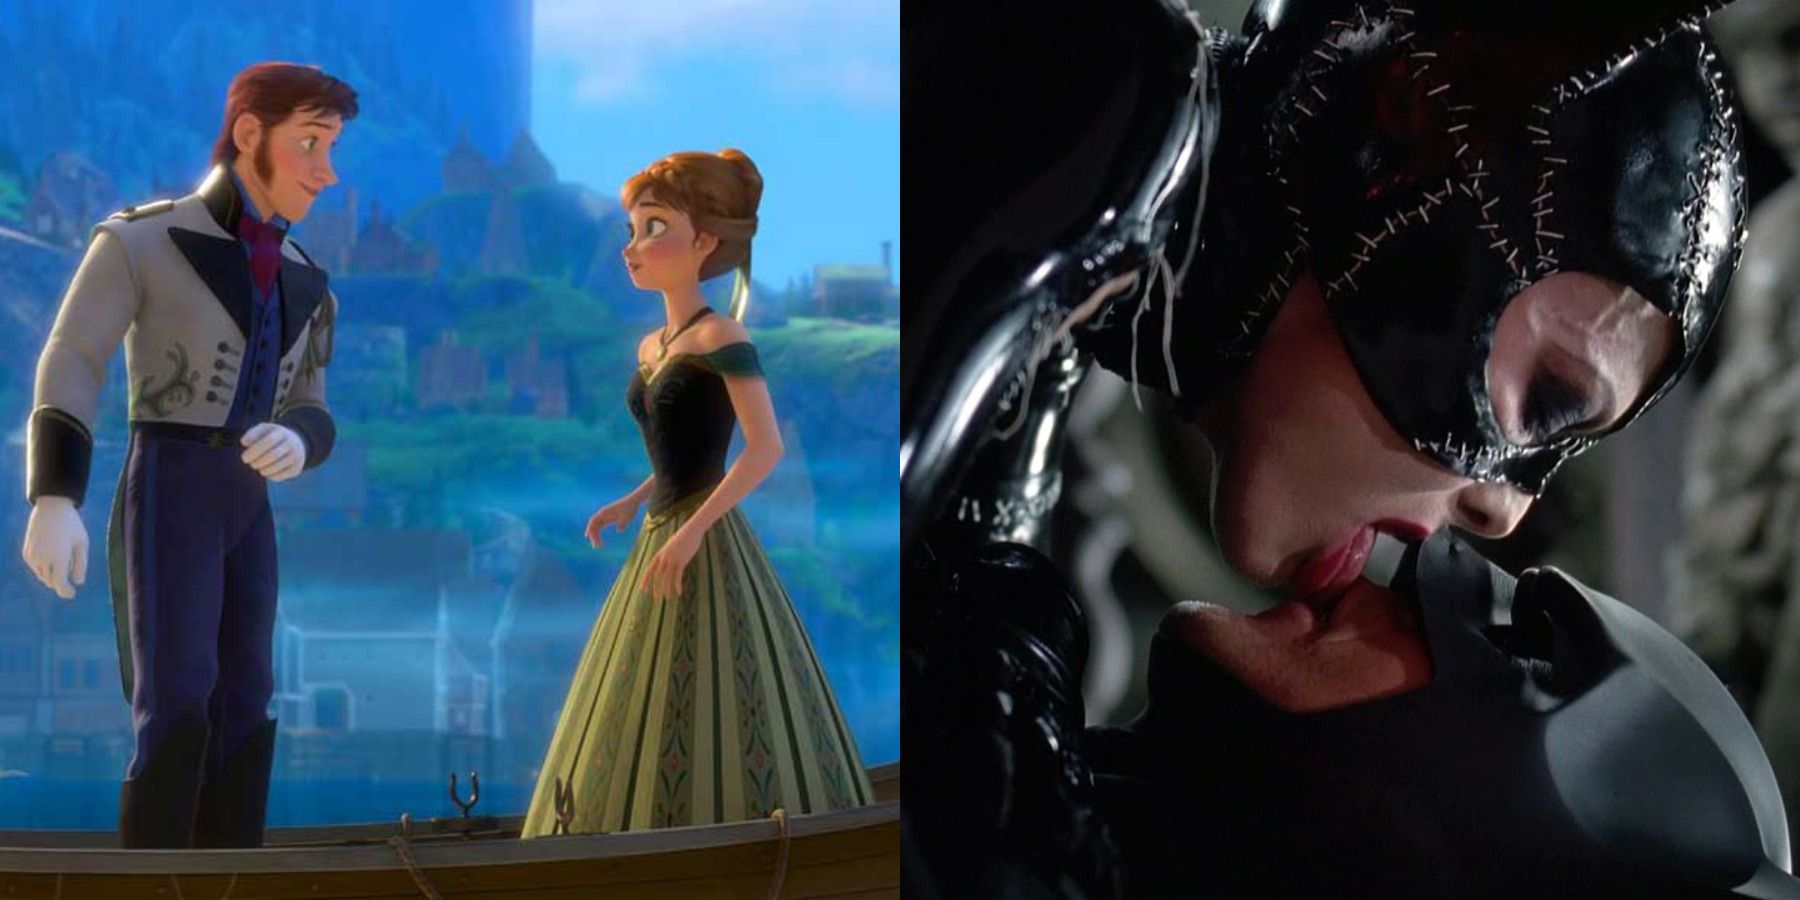 Movies in which the hero falls for the villain feature split image Frozen and Batman Returns